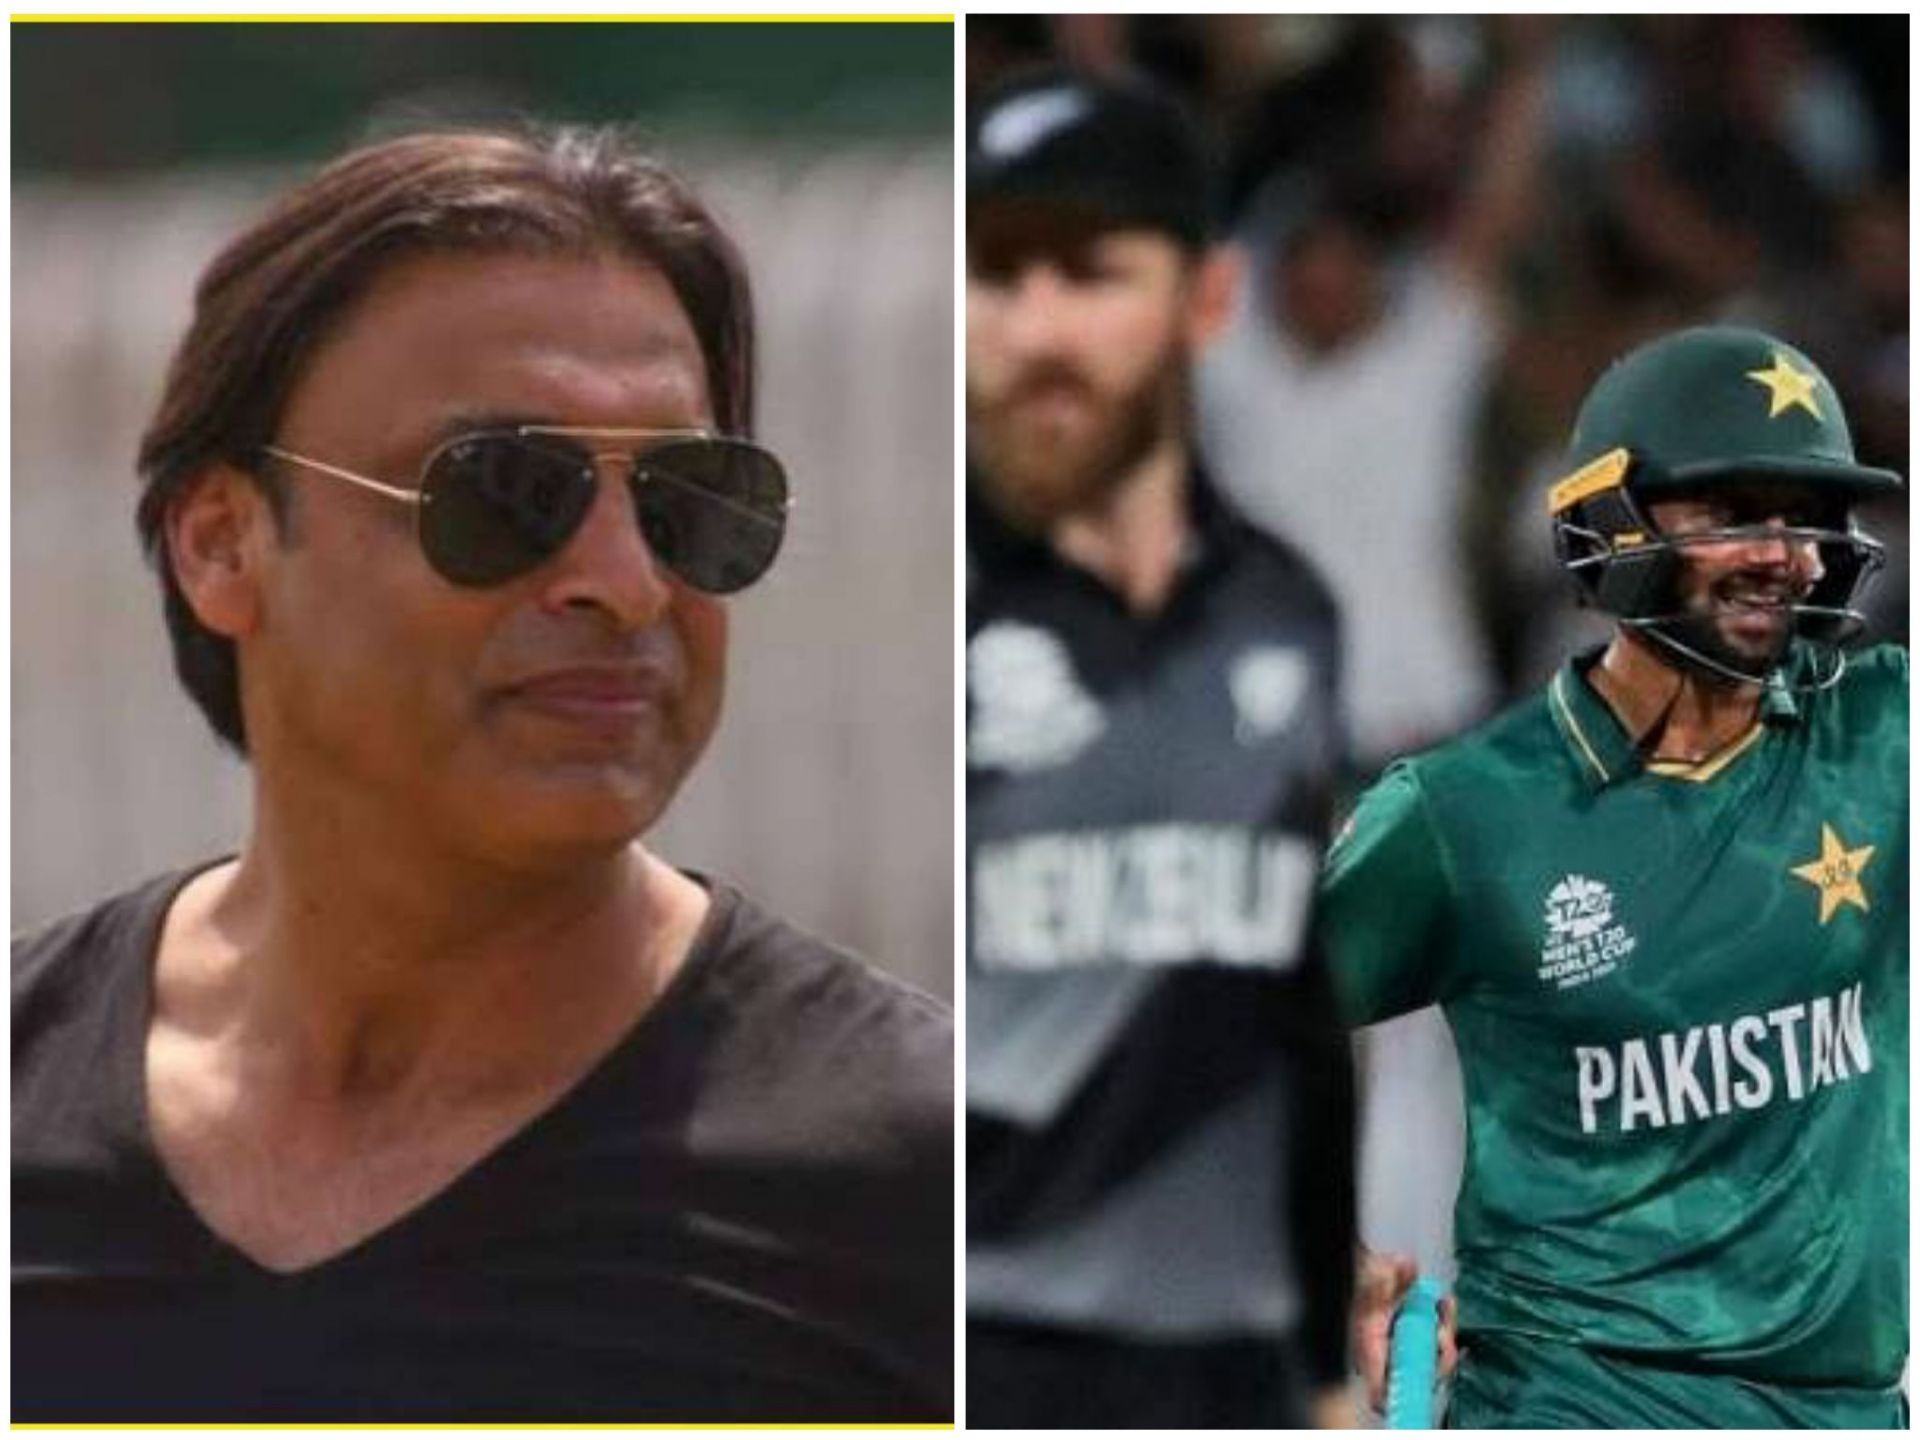 Shoaib Akhtar takes a dig at New Zealand after their defeat against Pakistan